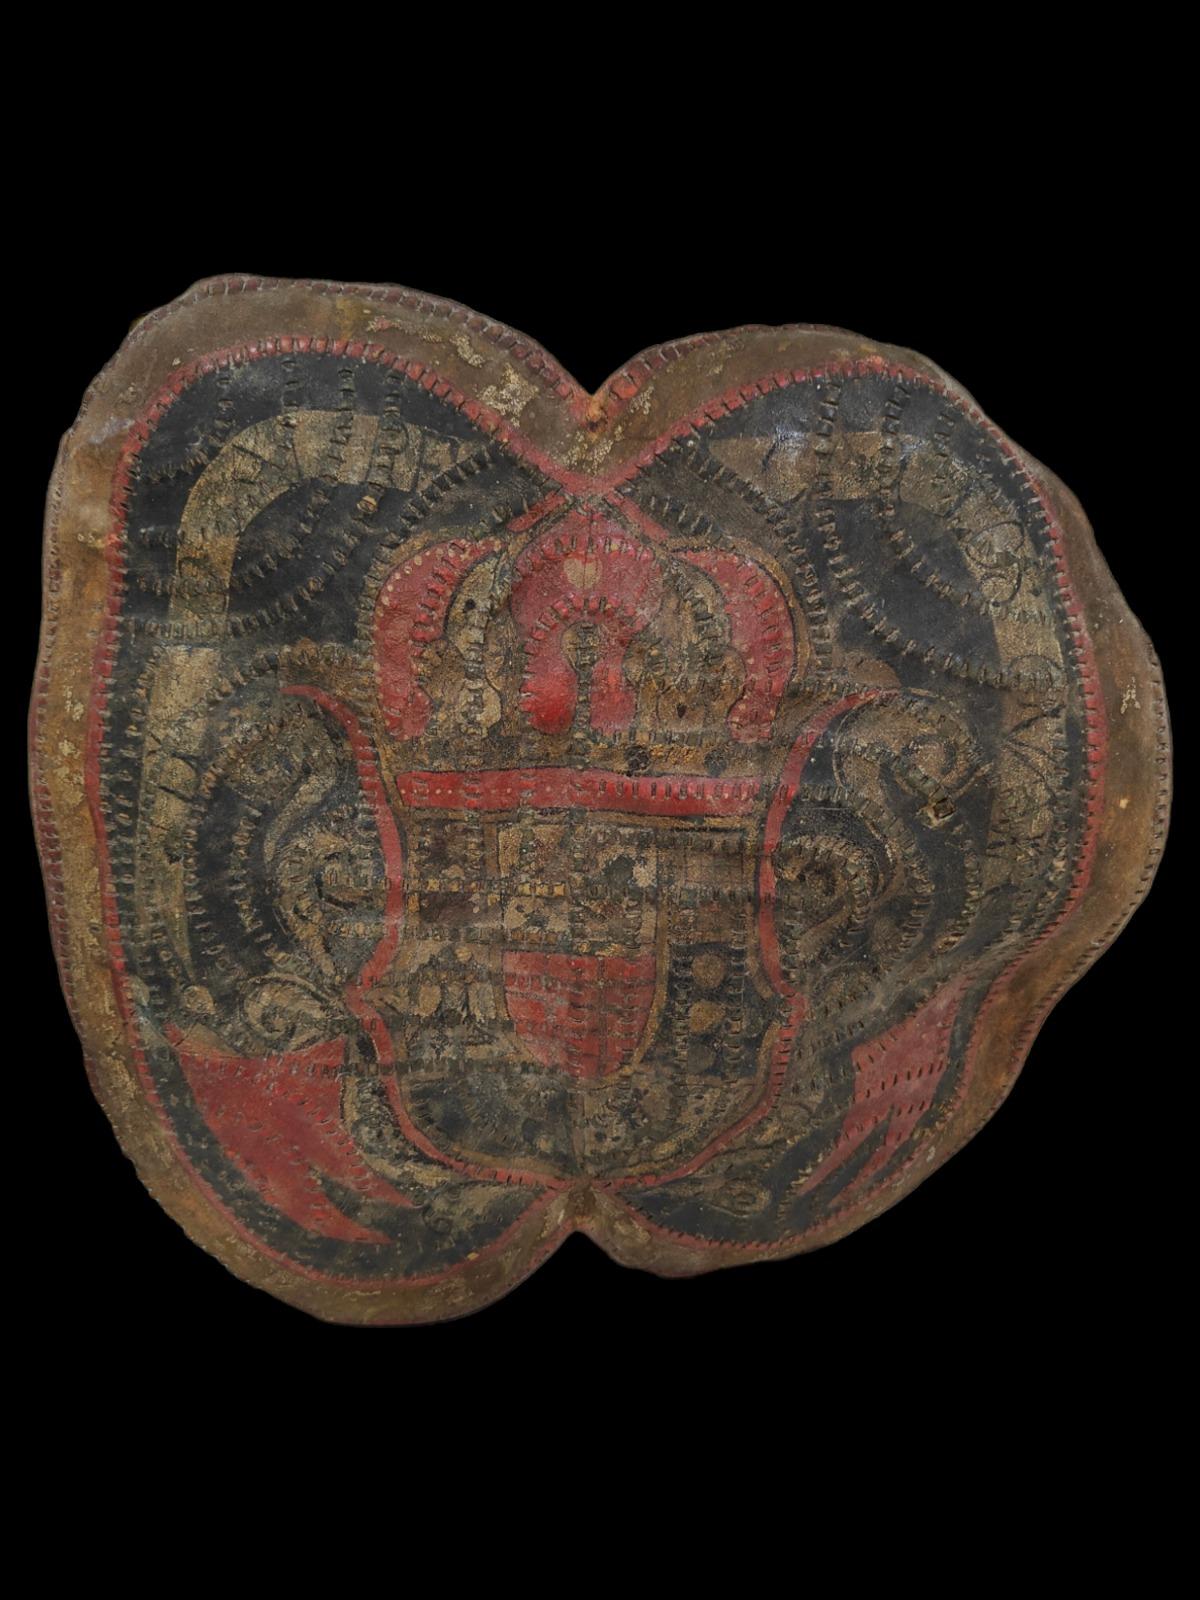 Mexcian shield XVII-XVIII Century.
Adargas are a type of leather shield introduced to Spain from North Africa in the 13th century. The Spanish then used a later form in the New World. This example is made from three layers of leather sewn together